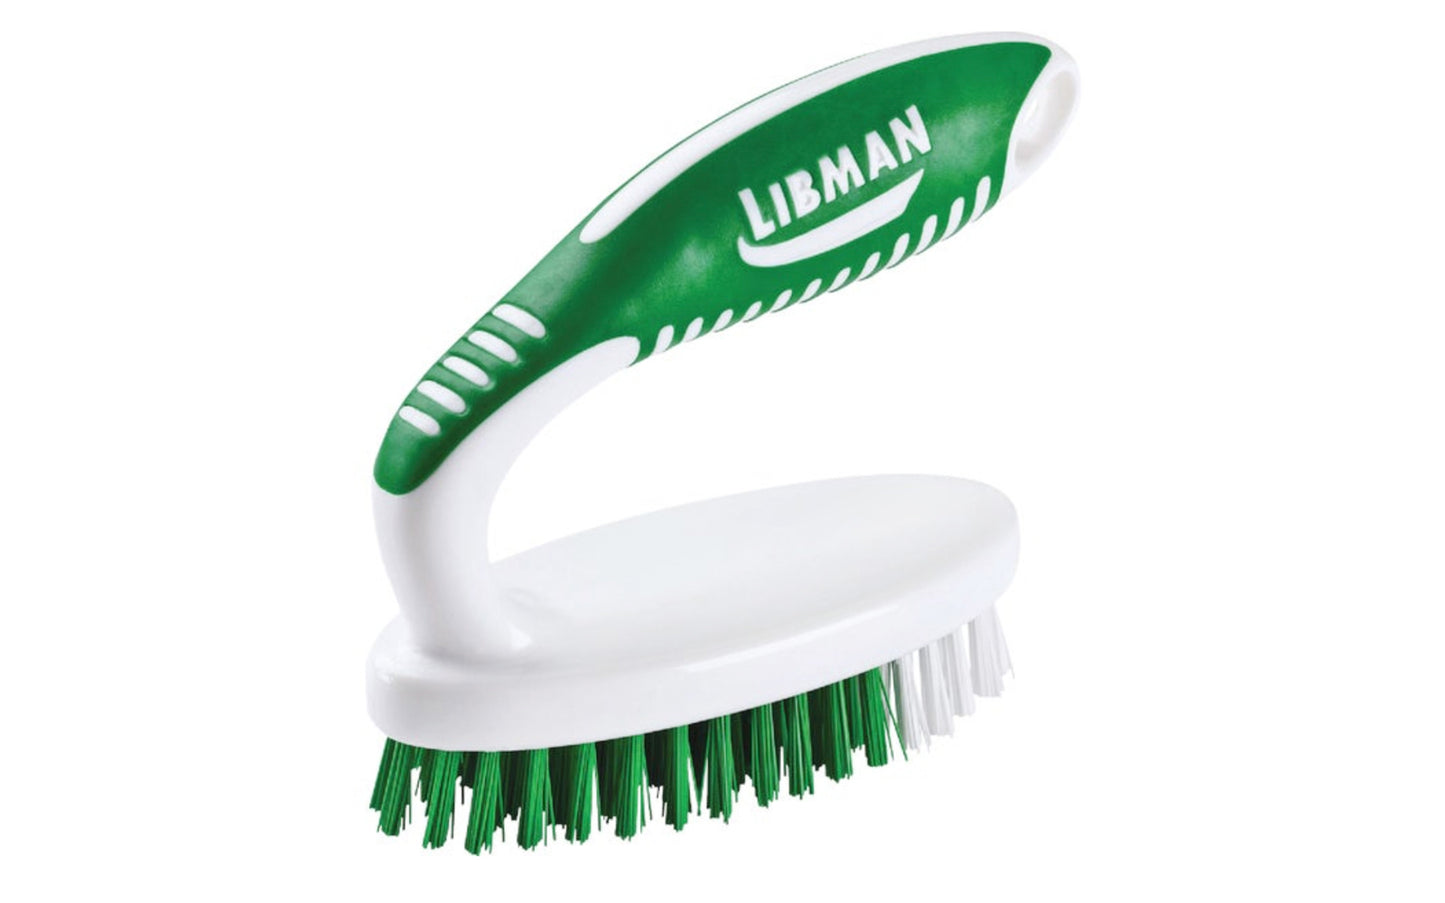 Libman Small Scrub Brush. 110 tufts of extra durable 3/4" polymer fibers. Ergonomic rubber-grip handle with thumb rest and hanger hole. Pointed head for getting into corners.  Made in USA. 071736000152.